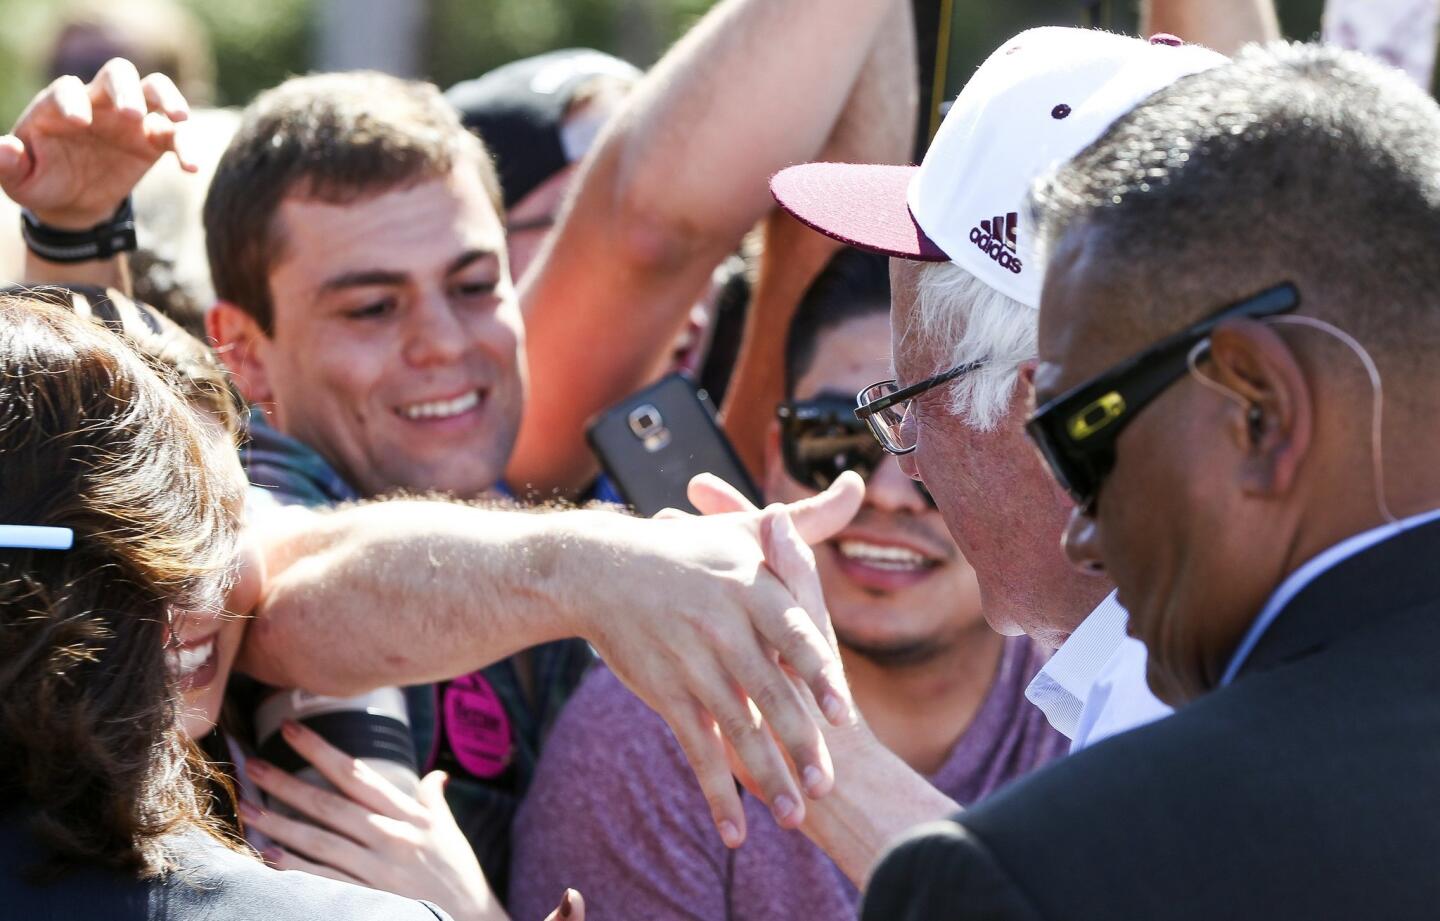 Democratic presidential candidate Bernie Sanders shakes hands with supporters after speaking at Rancho Buena Vista High School in Vista.